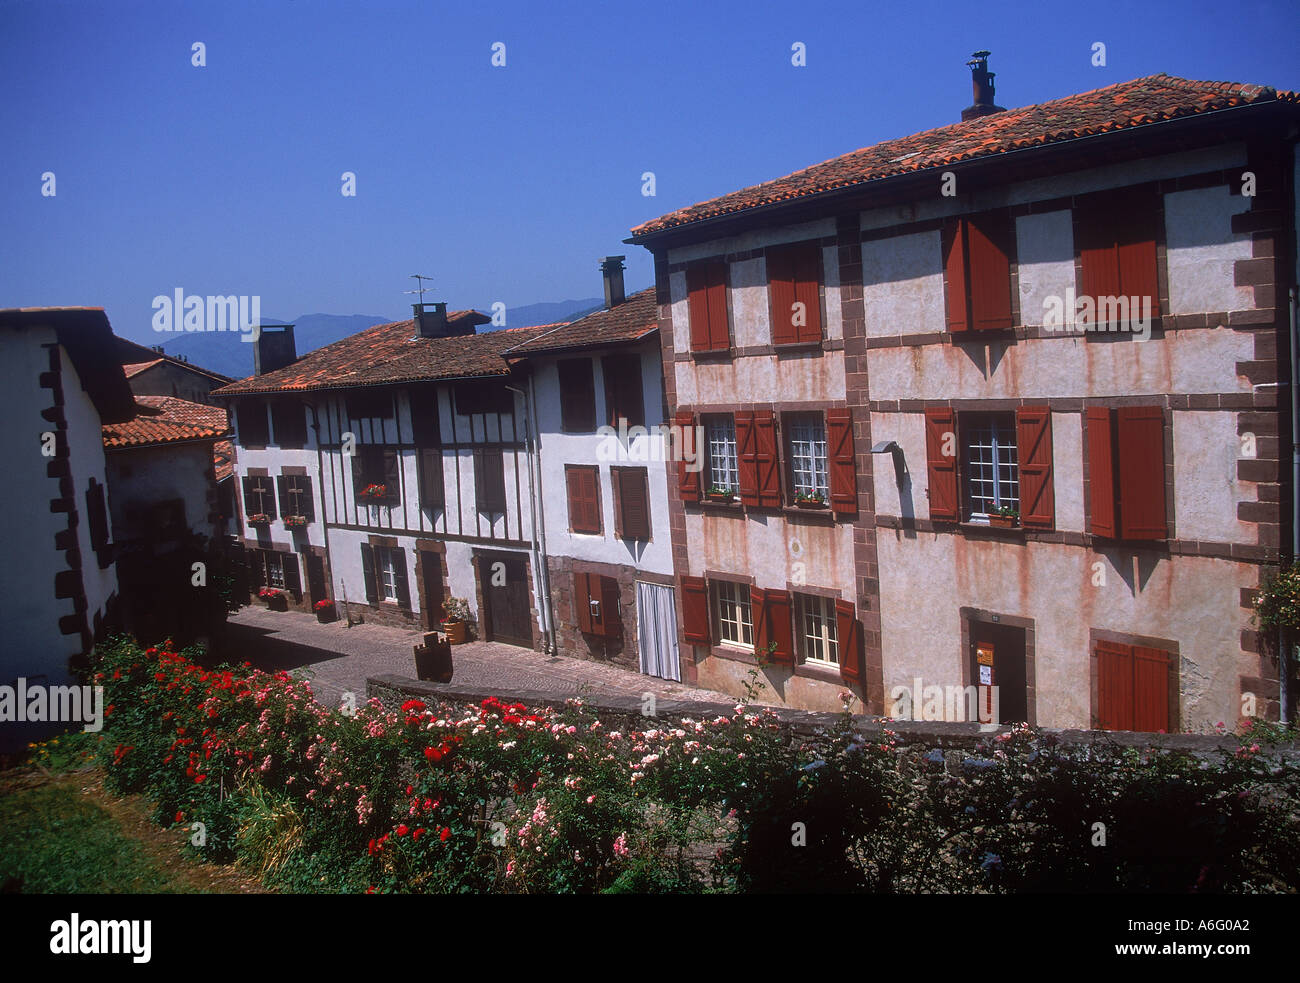 Typical Basque architecture in St Jean Pied de Port,  Pays Basque Stock Photo